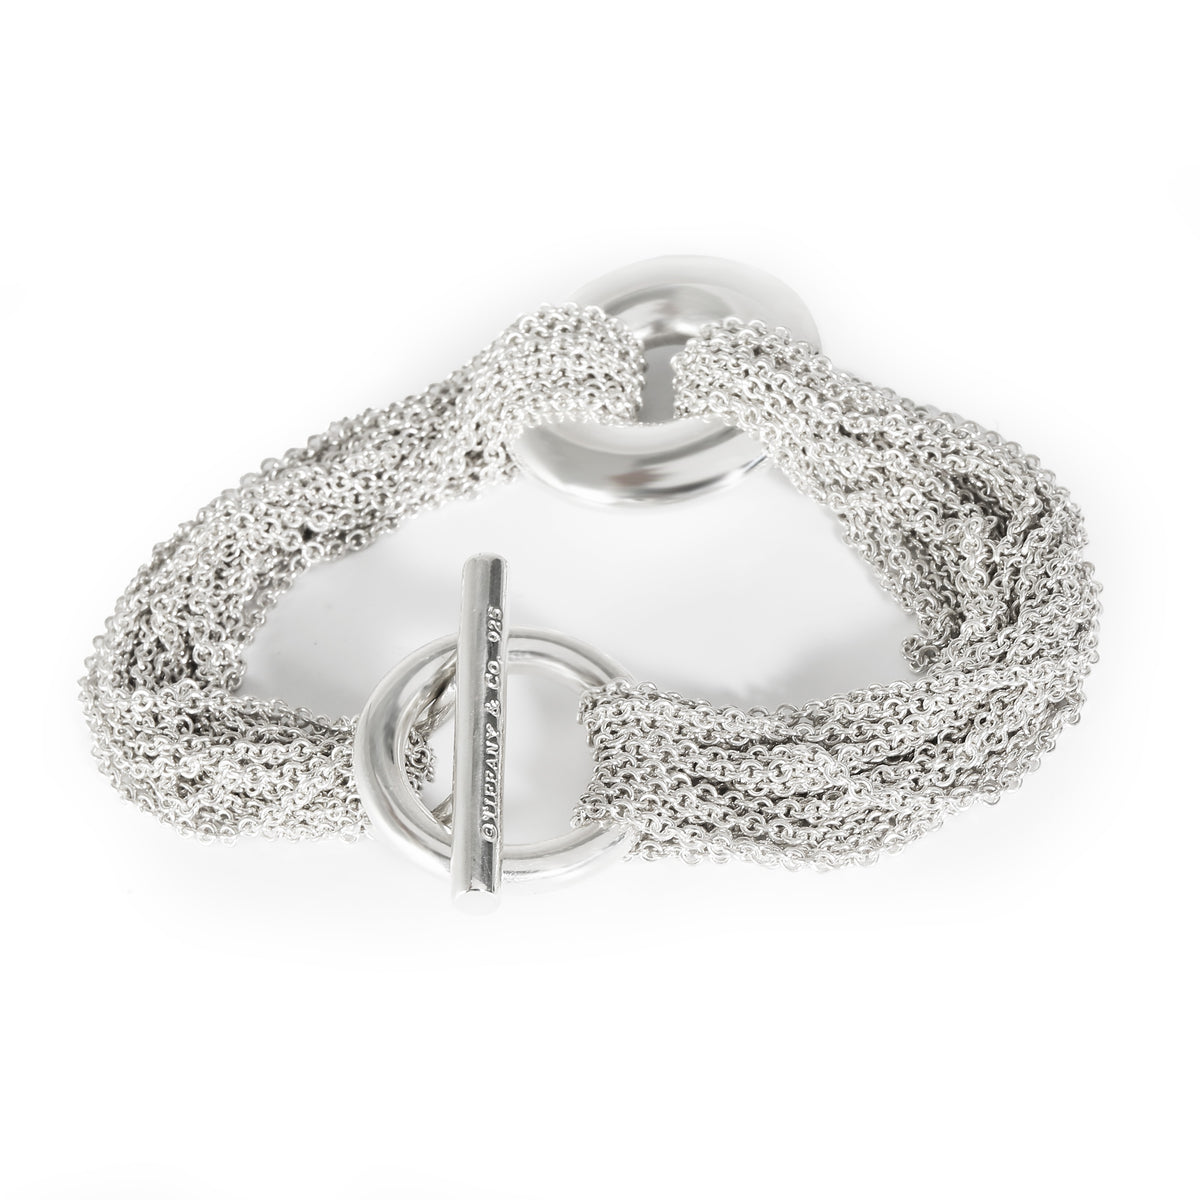 Multi-Strand Bracelet in Sterling Silver with Toggle Clasp